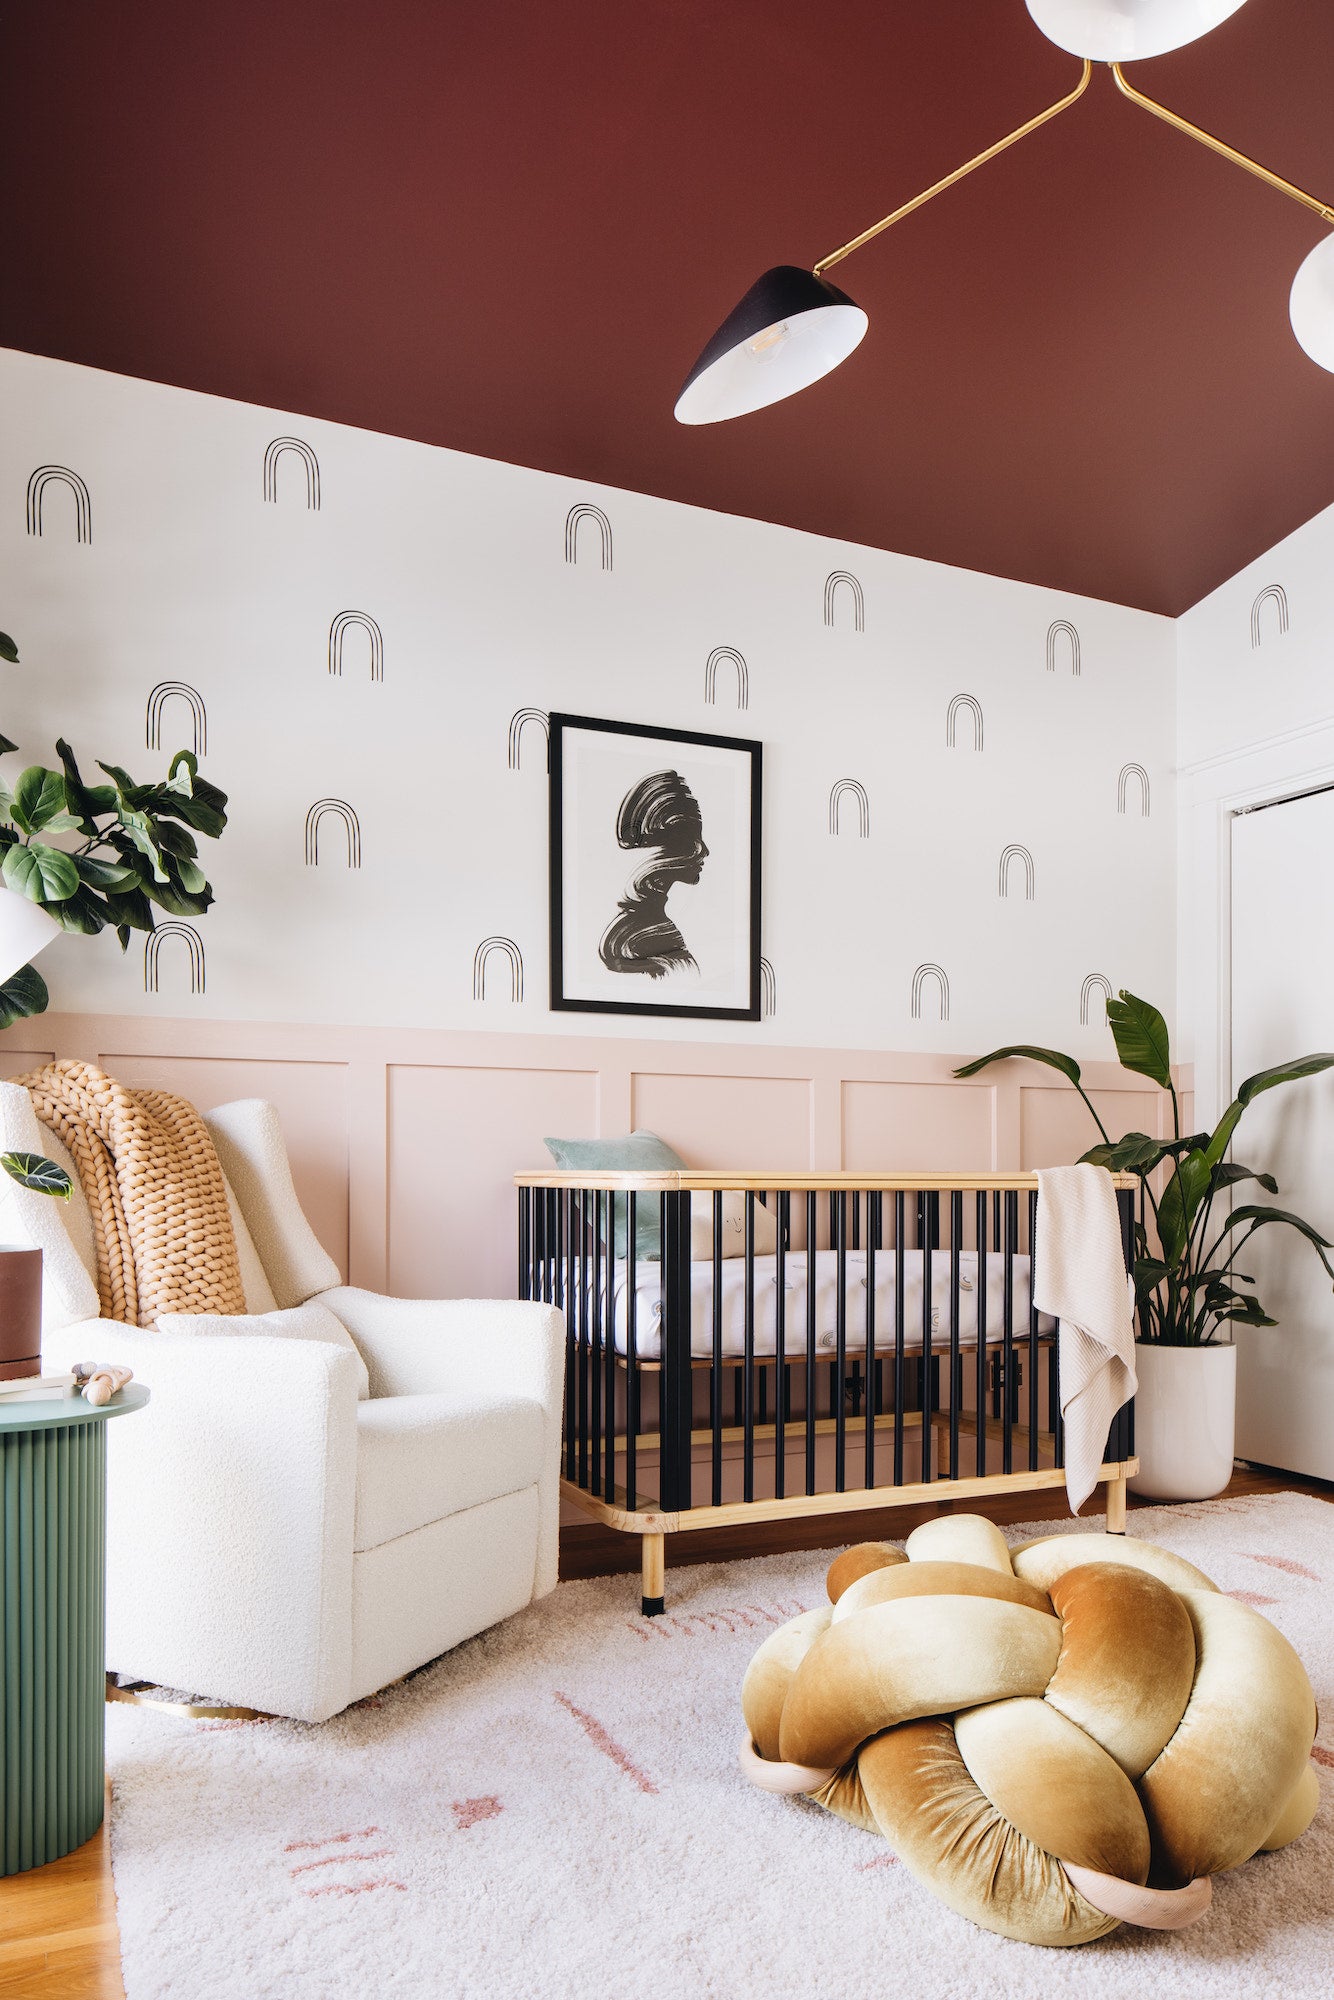 A Painted Ceiling Shines In This Blissfully Bold Nursery